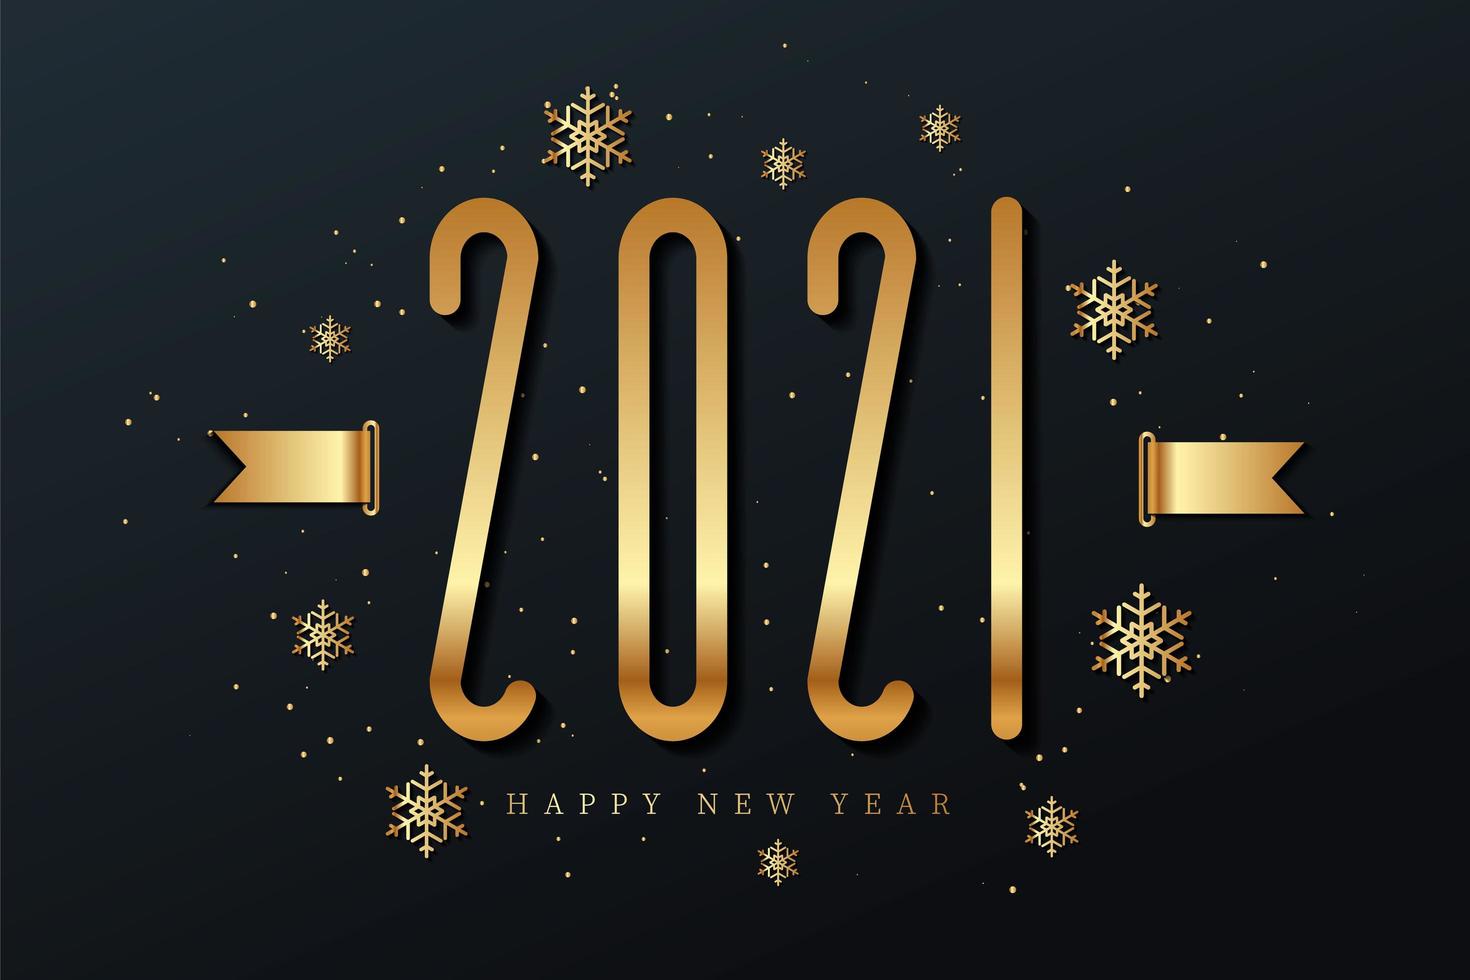 Happy New Year 2021 with snowflakes vector